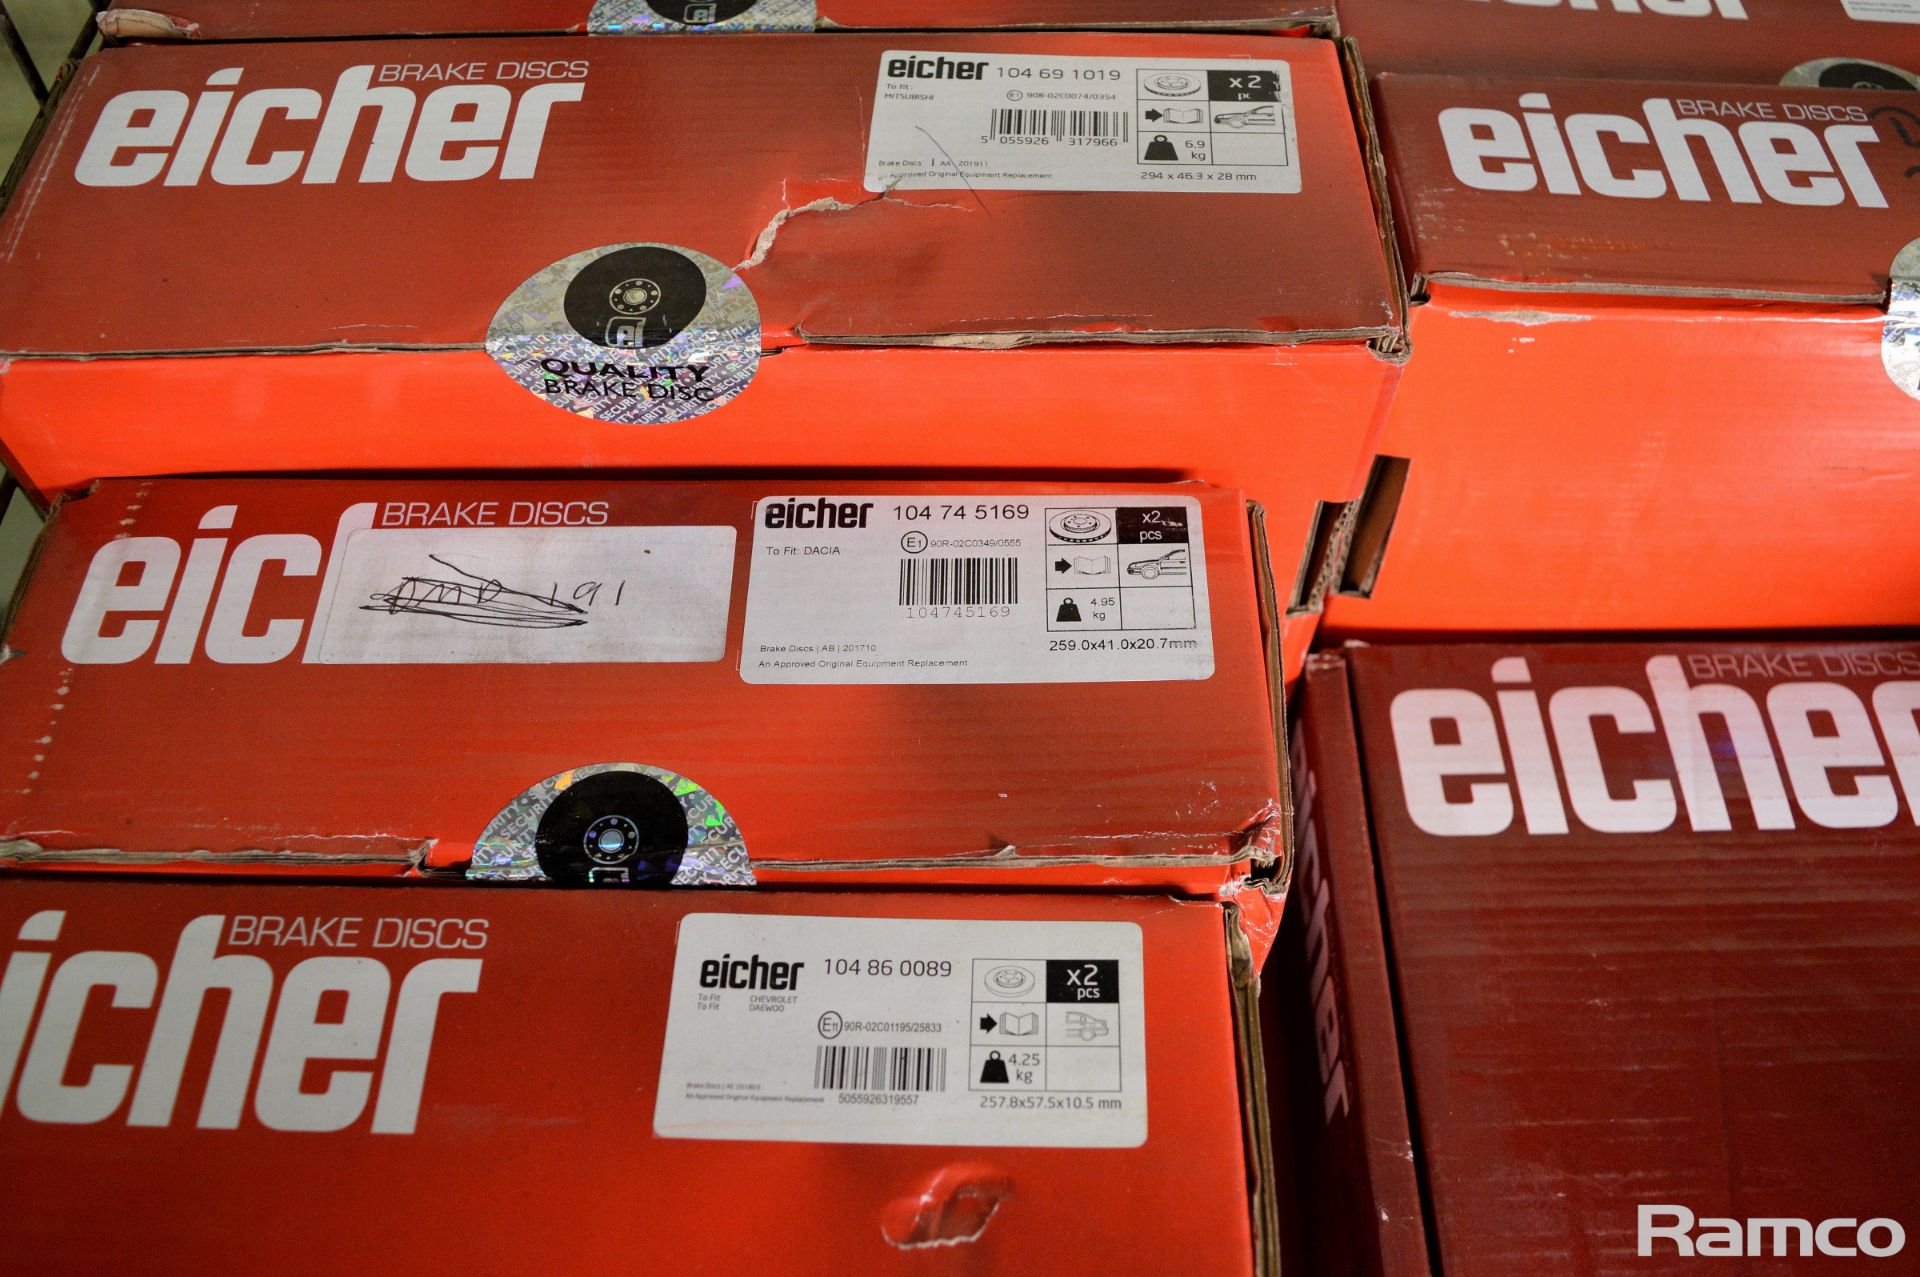 Eicher brake discs - see pictures for model / type - Image 5 of 7